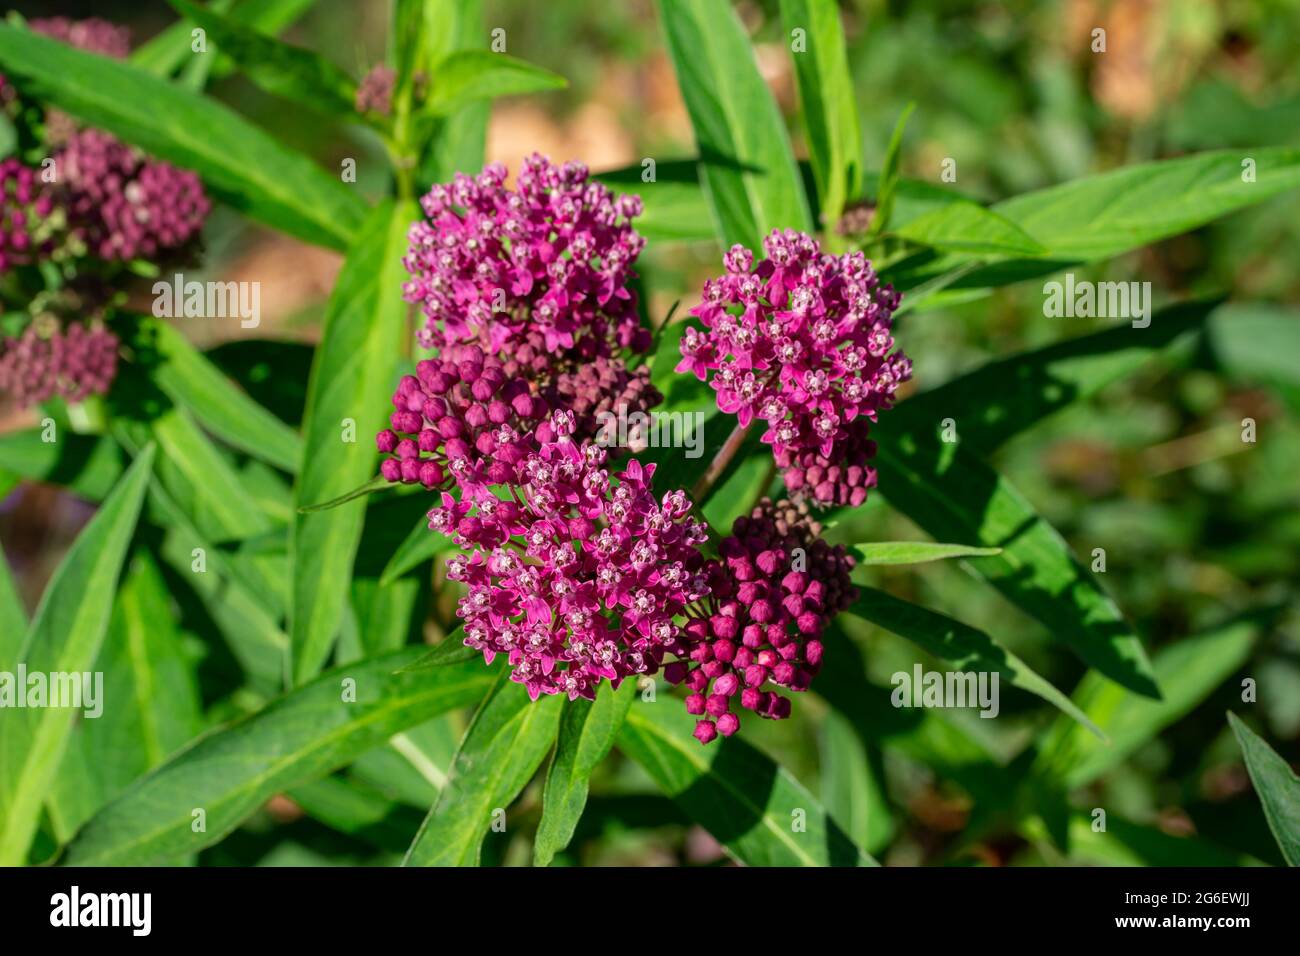 This image shows a macro abstract texture background of vibrant emerging rosy pink blossoms and buds on a swamp milkweed plant (asclepias incarnata) i Stock Photo